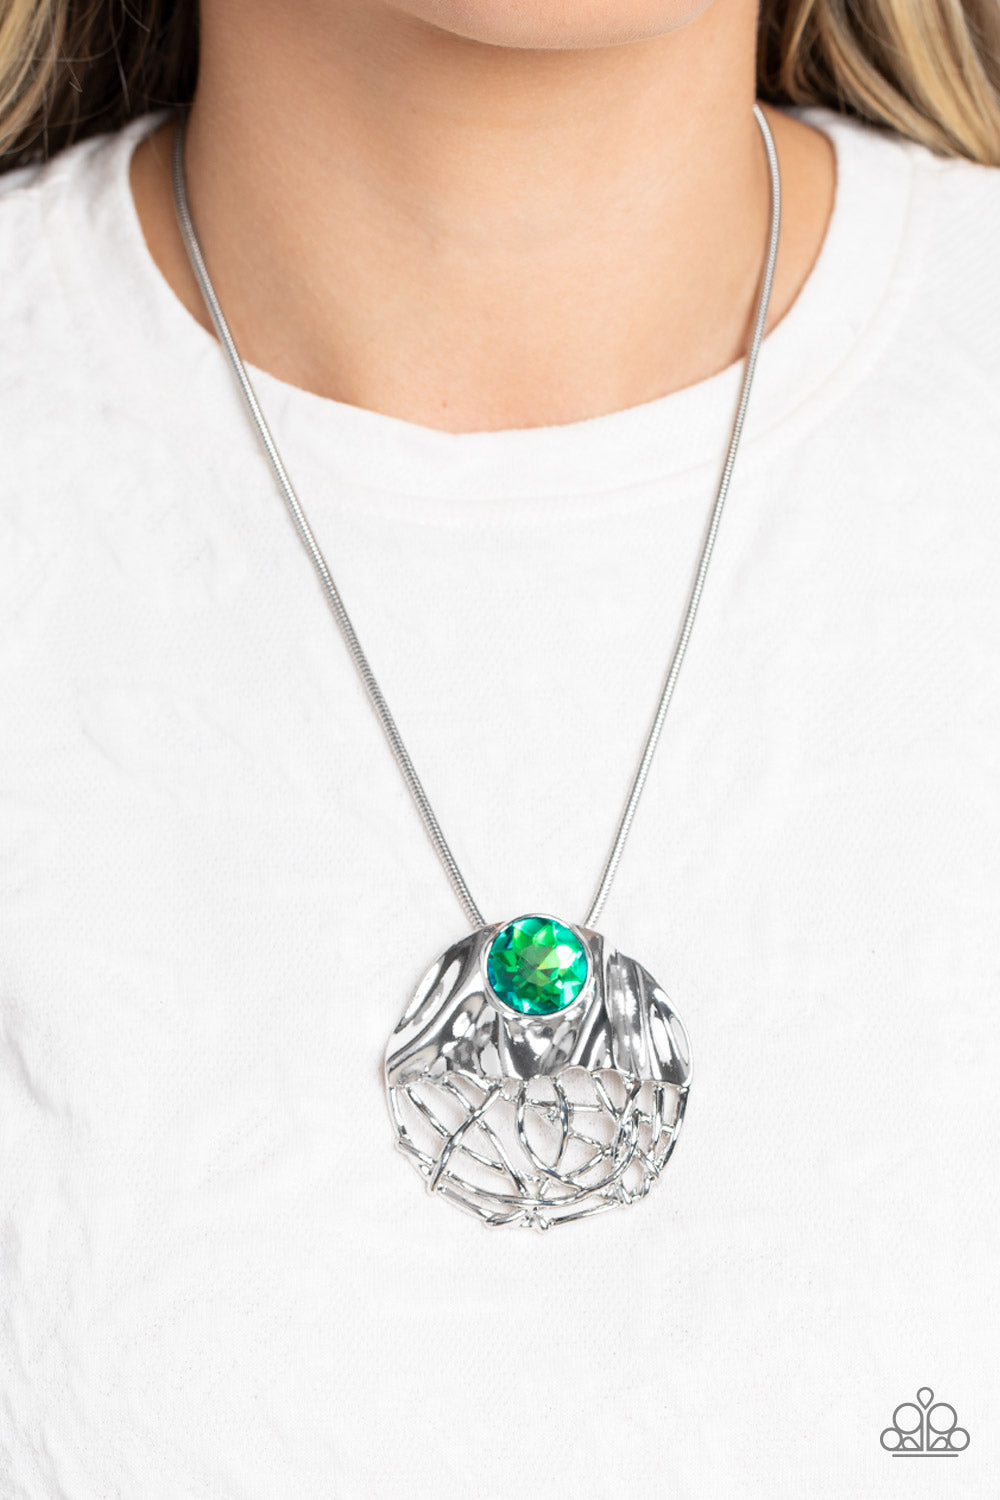 Paparazzi Accessories Lush Lattice - Green Mimicking a lattice-like pattern, abstract silver lines flow from the bottom of an oversized, hammered, silver half-circle pendant that attaches to a shimmery silver snake chain. Within the folds of the silver ha